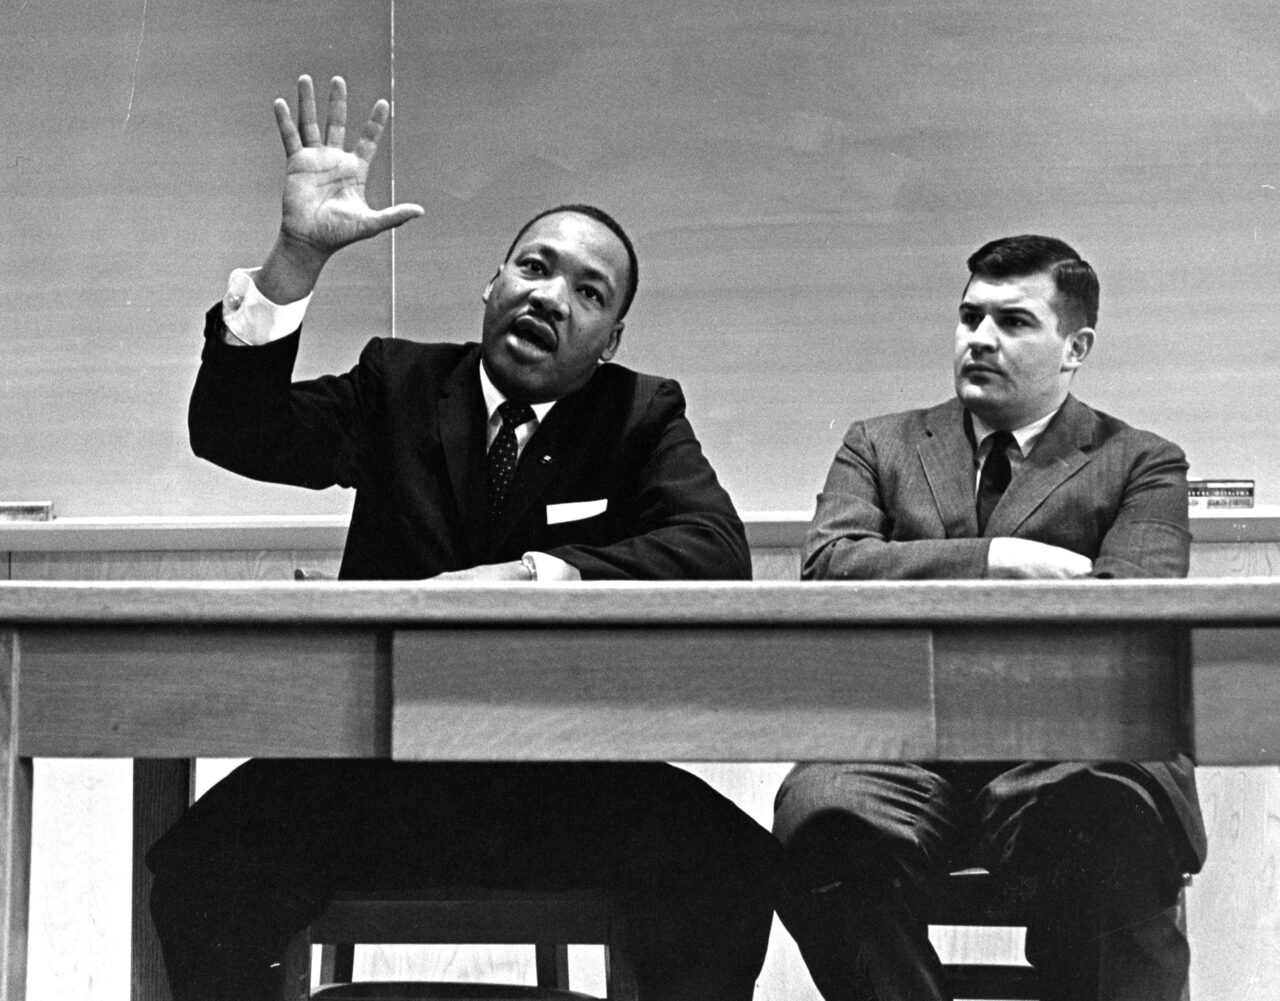 057-Photo-Martin-Luther-King-hand-raised-sitting-with-John-Maguire-at-desk-in-a-classroom-1280x1001.jpg